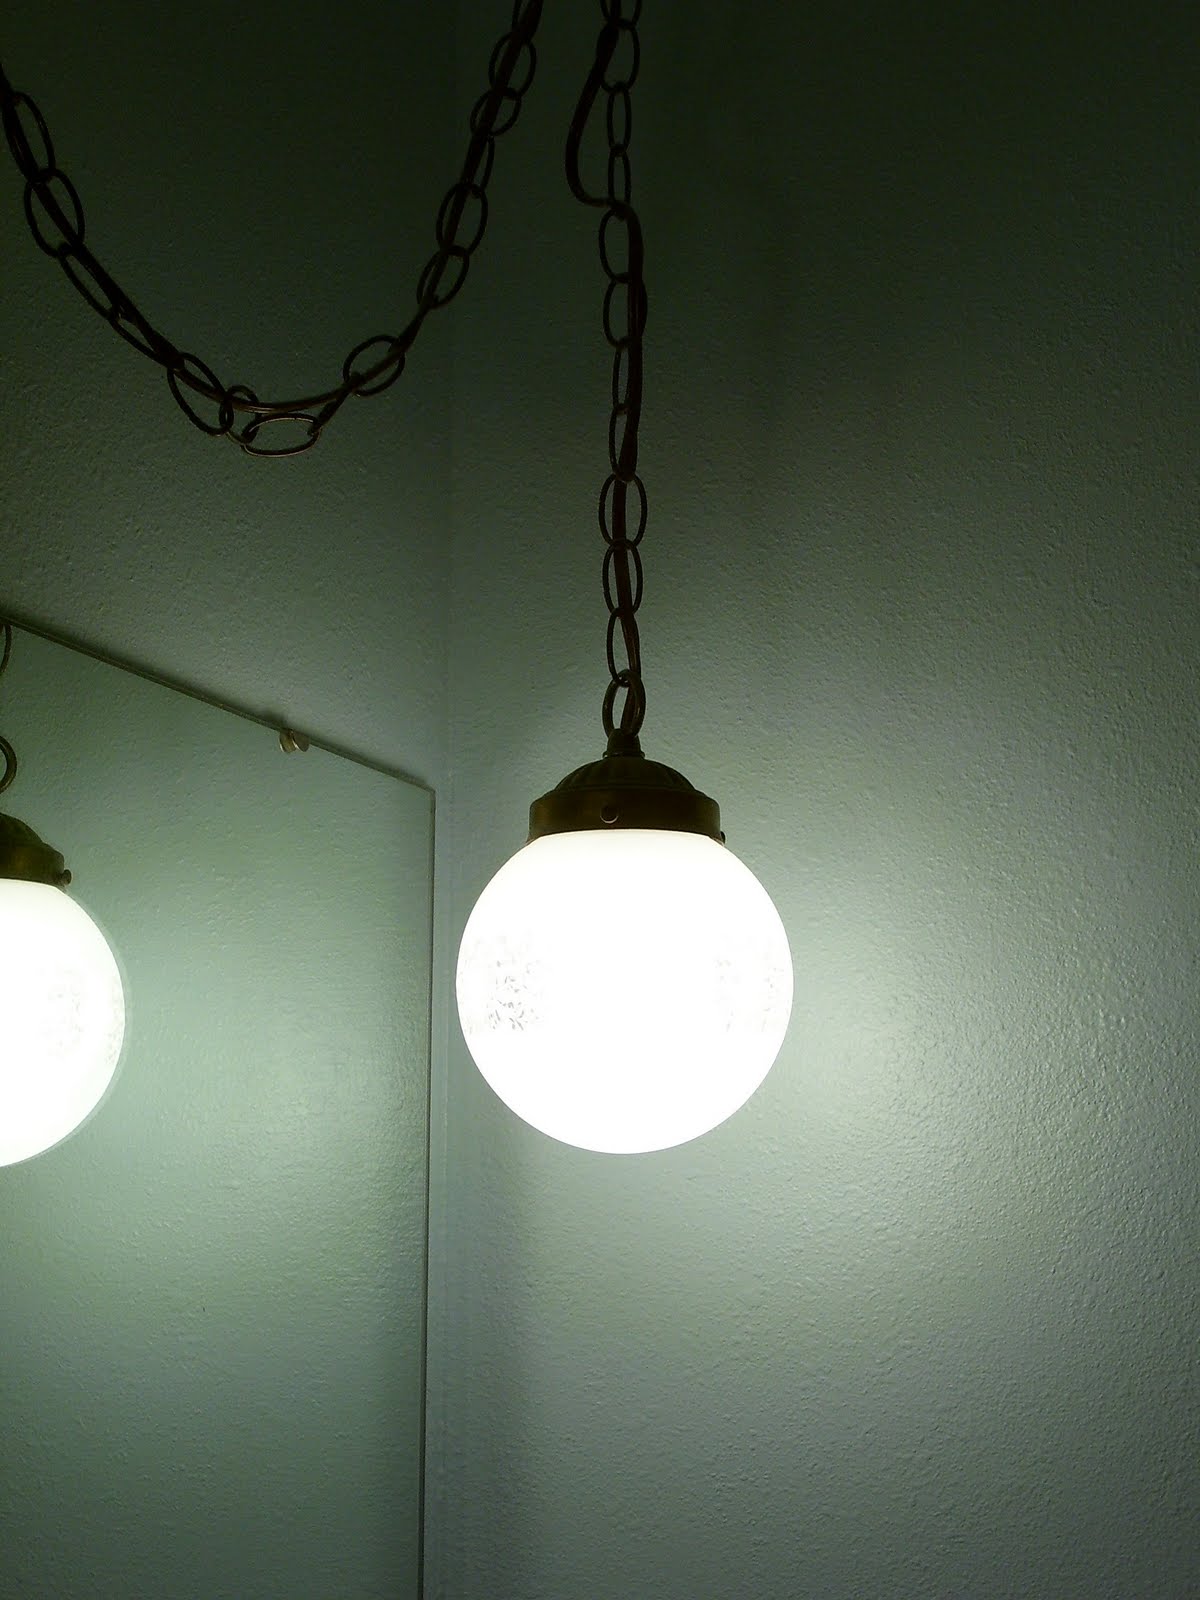 Old Fashioned Lighting At Home Hanging Ceiling Light Fixtures